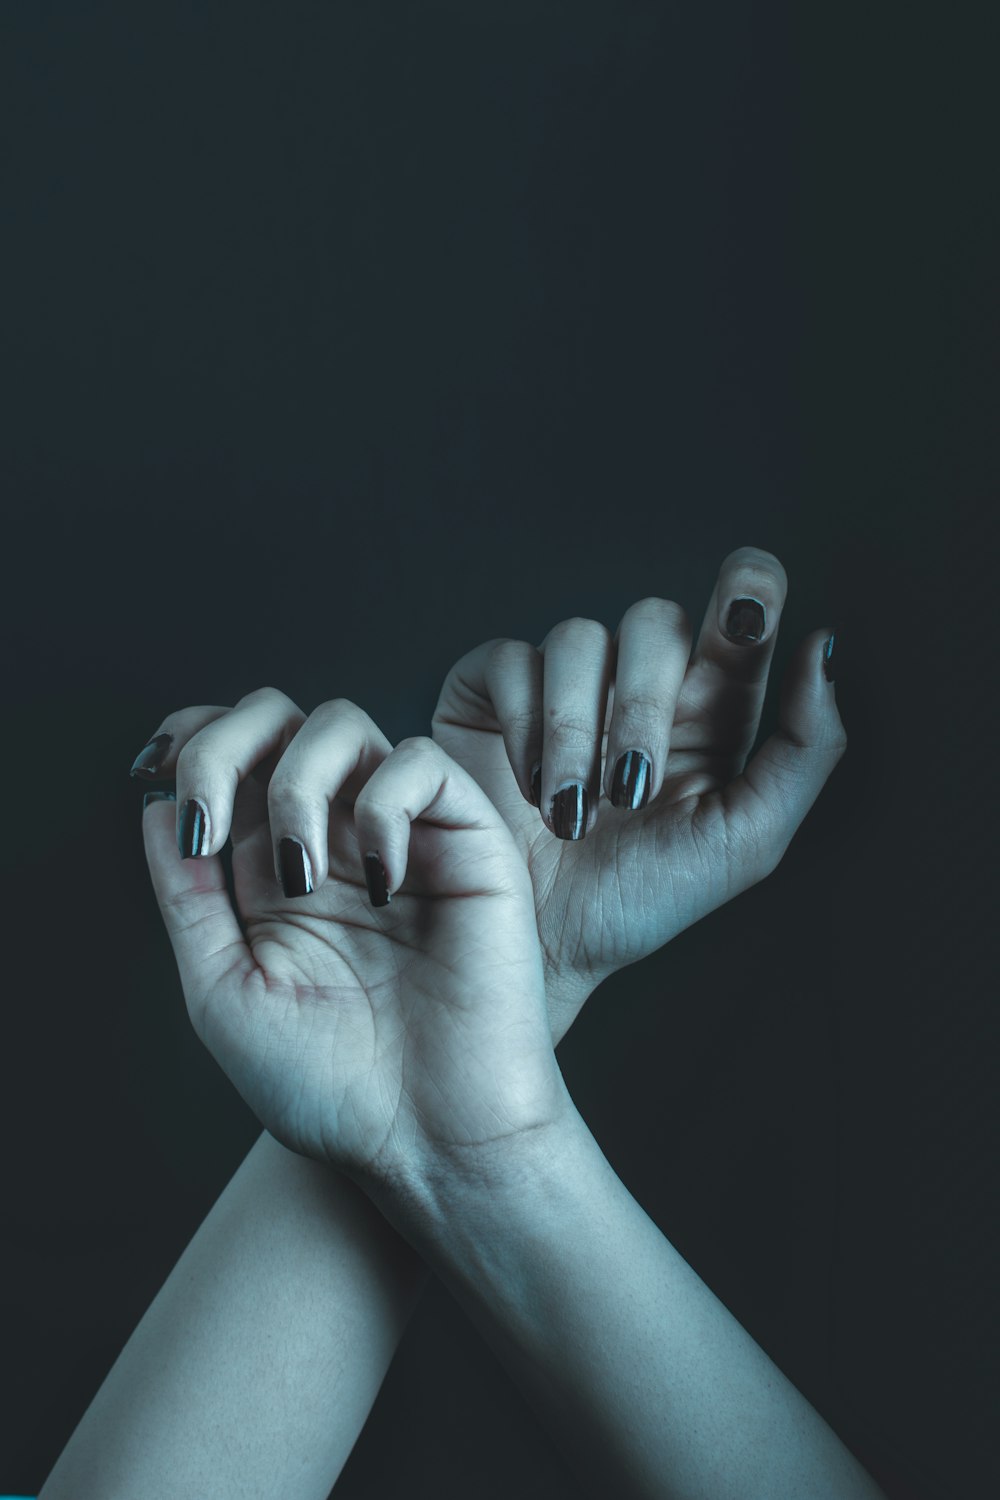 two hands with black and white nail polish holding each other